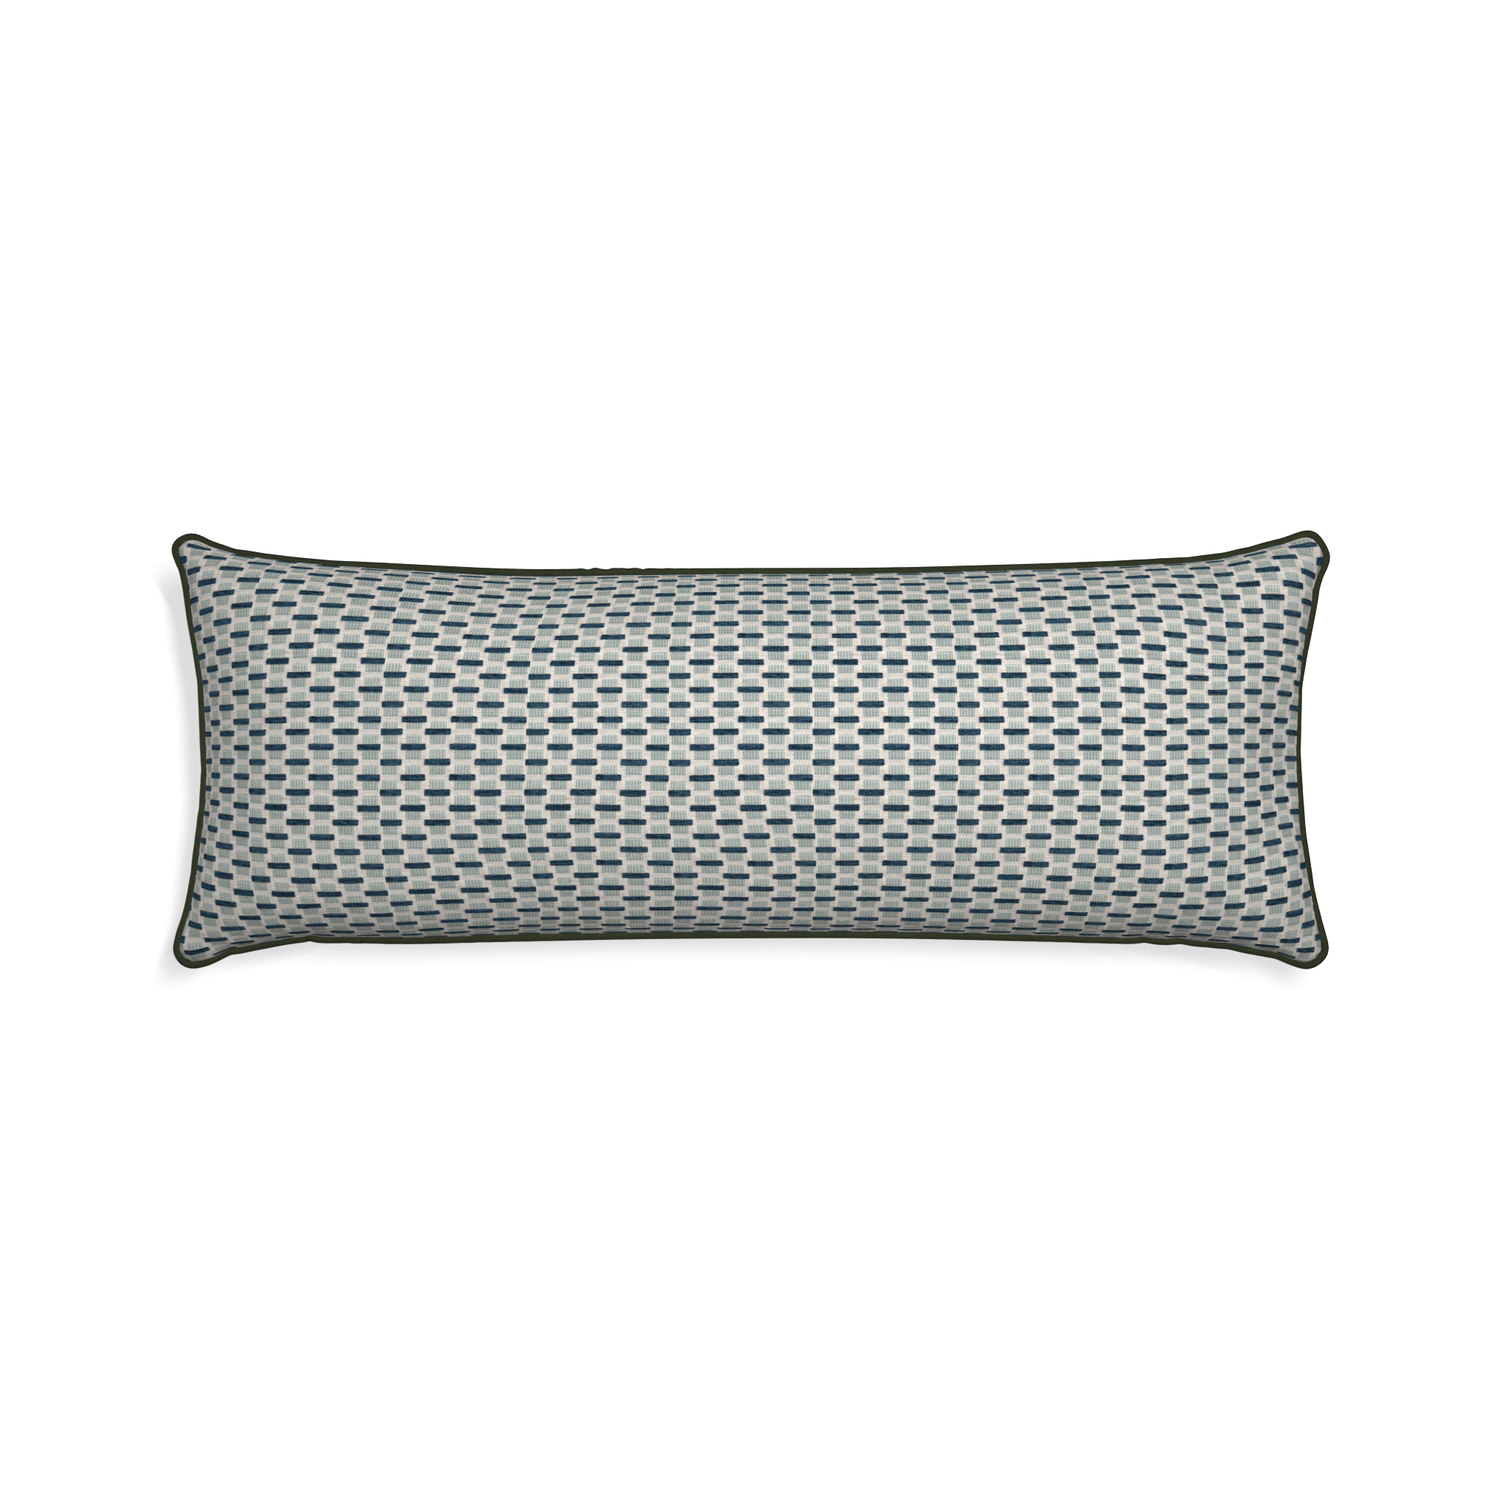 Xl-lumbar willow amalfi custom blue geometric chenillepillow with f piping on white background